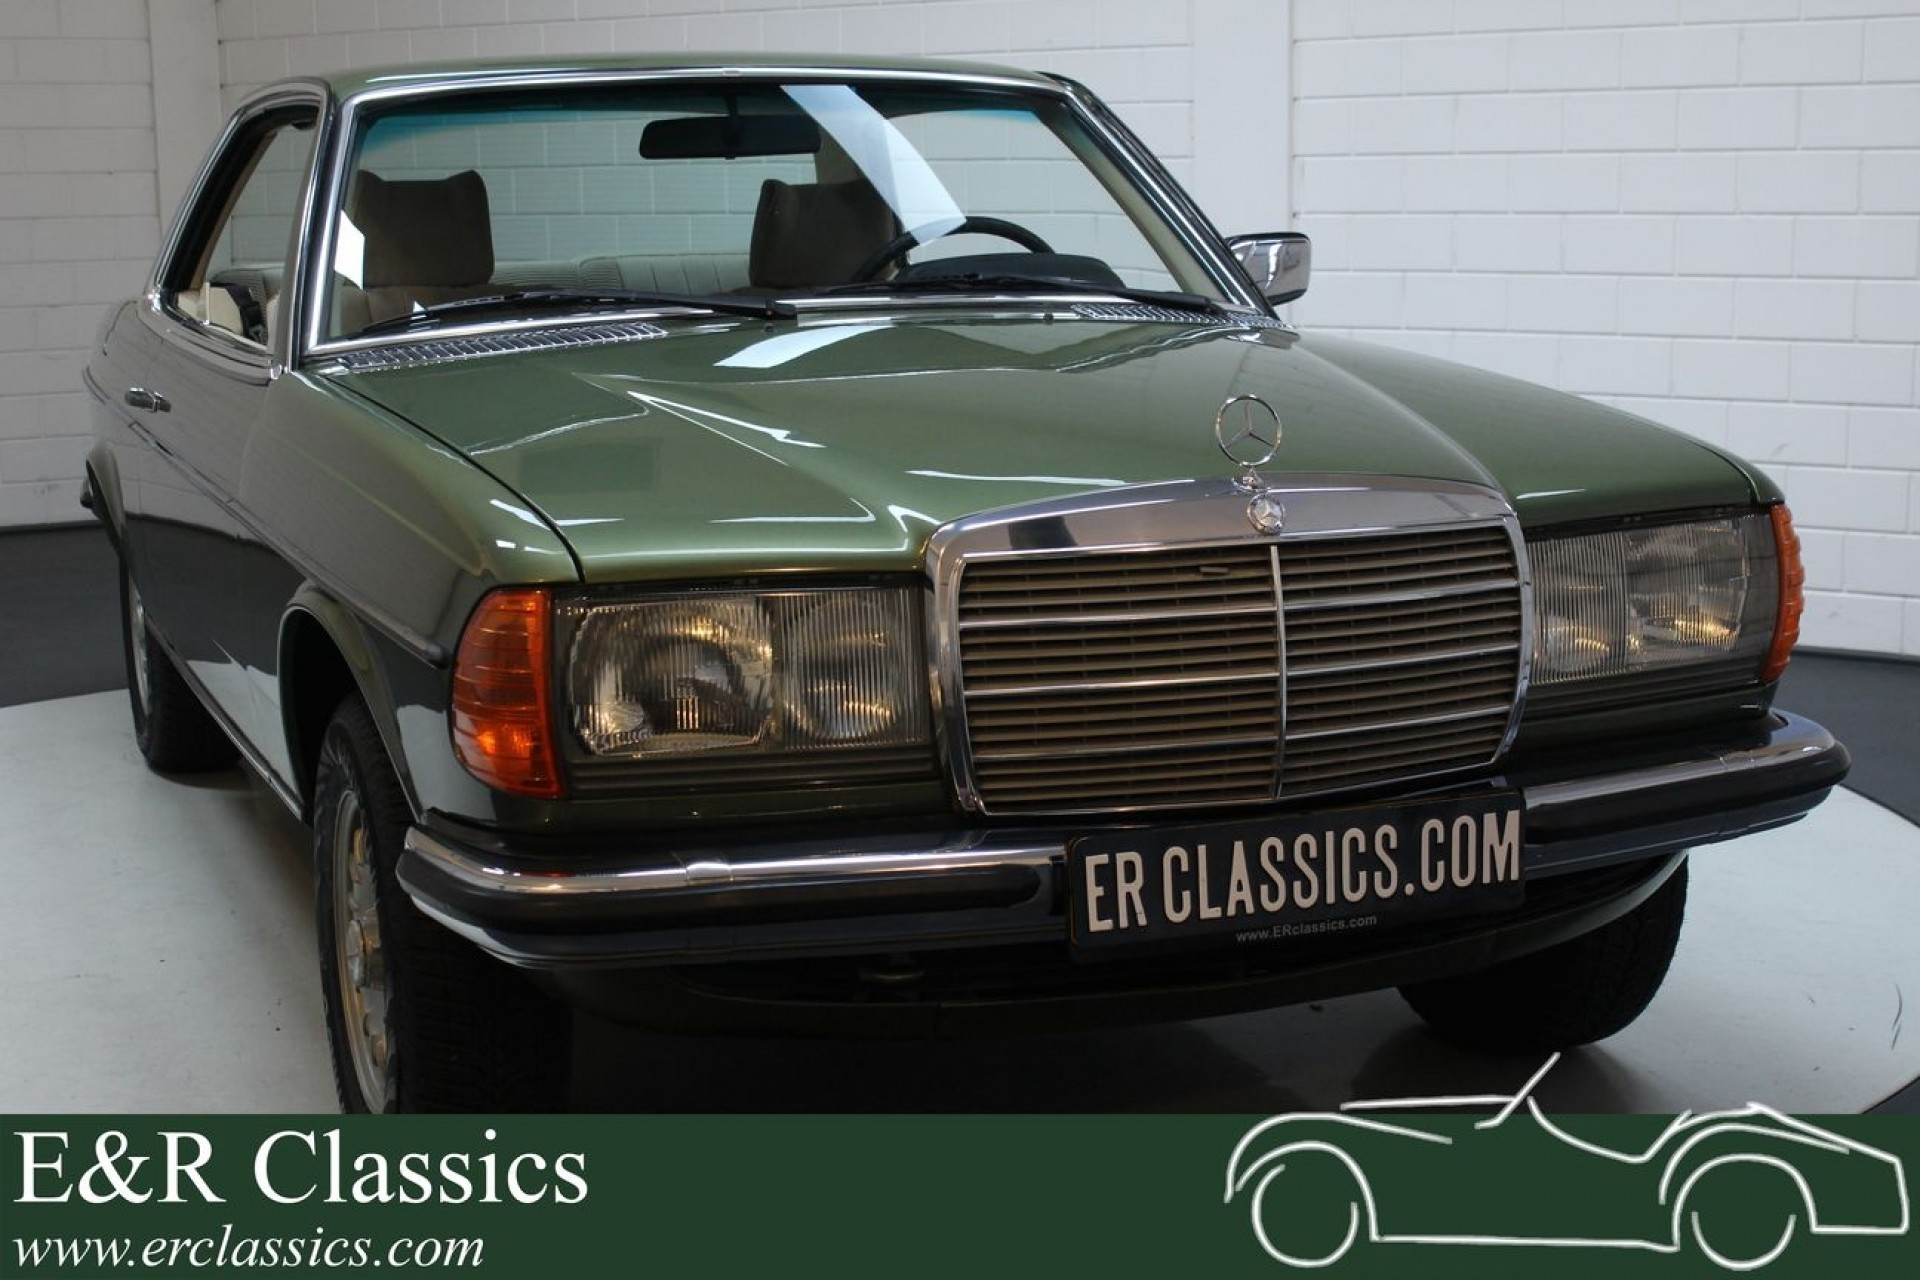 Mercedes Benz 230c Coupe W123 1978 For Sale At Erclassics